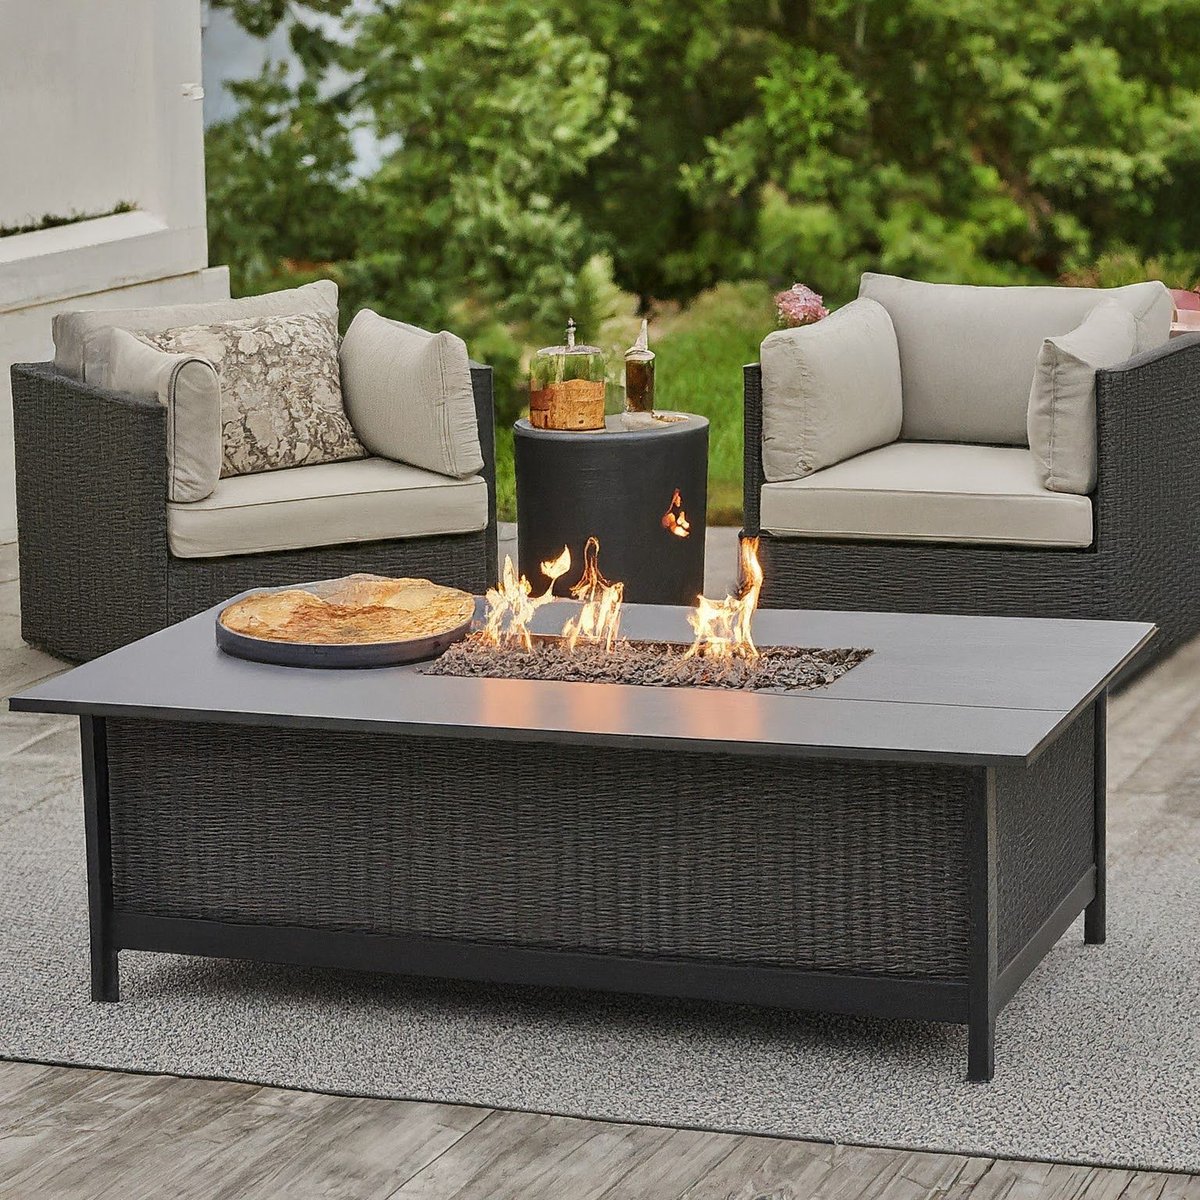 Transform your backyard into a cozy oasis with our outdoor furniture set featuring a stylish fire pit table. Visit sunlitbackyardoasis.com to elevate your outdoor space! 🔥🌳 #OutdoorFurniture #FirePitTable #BackyardOasis